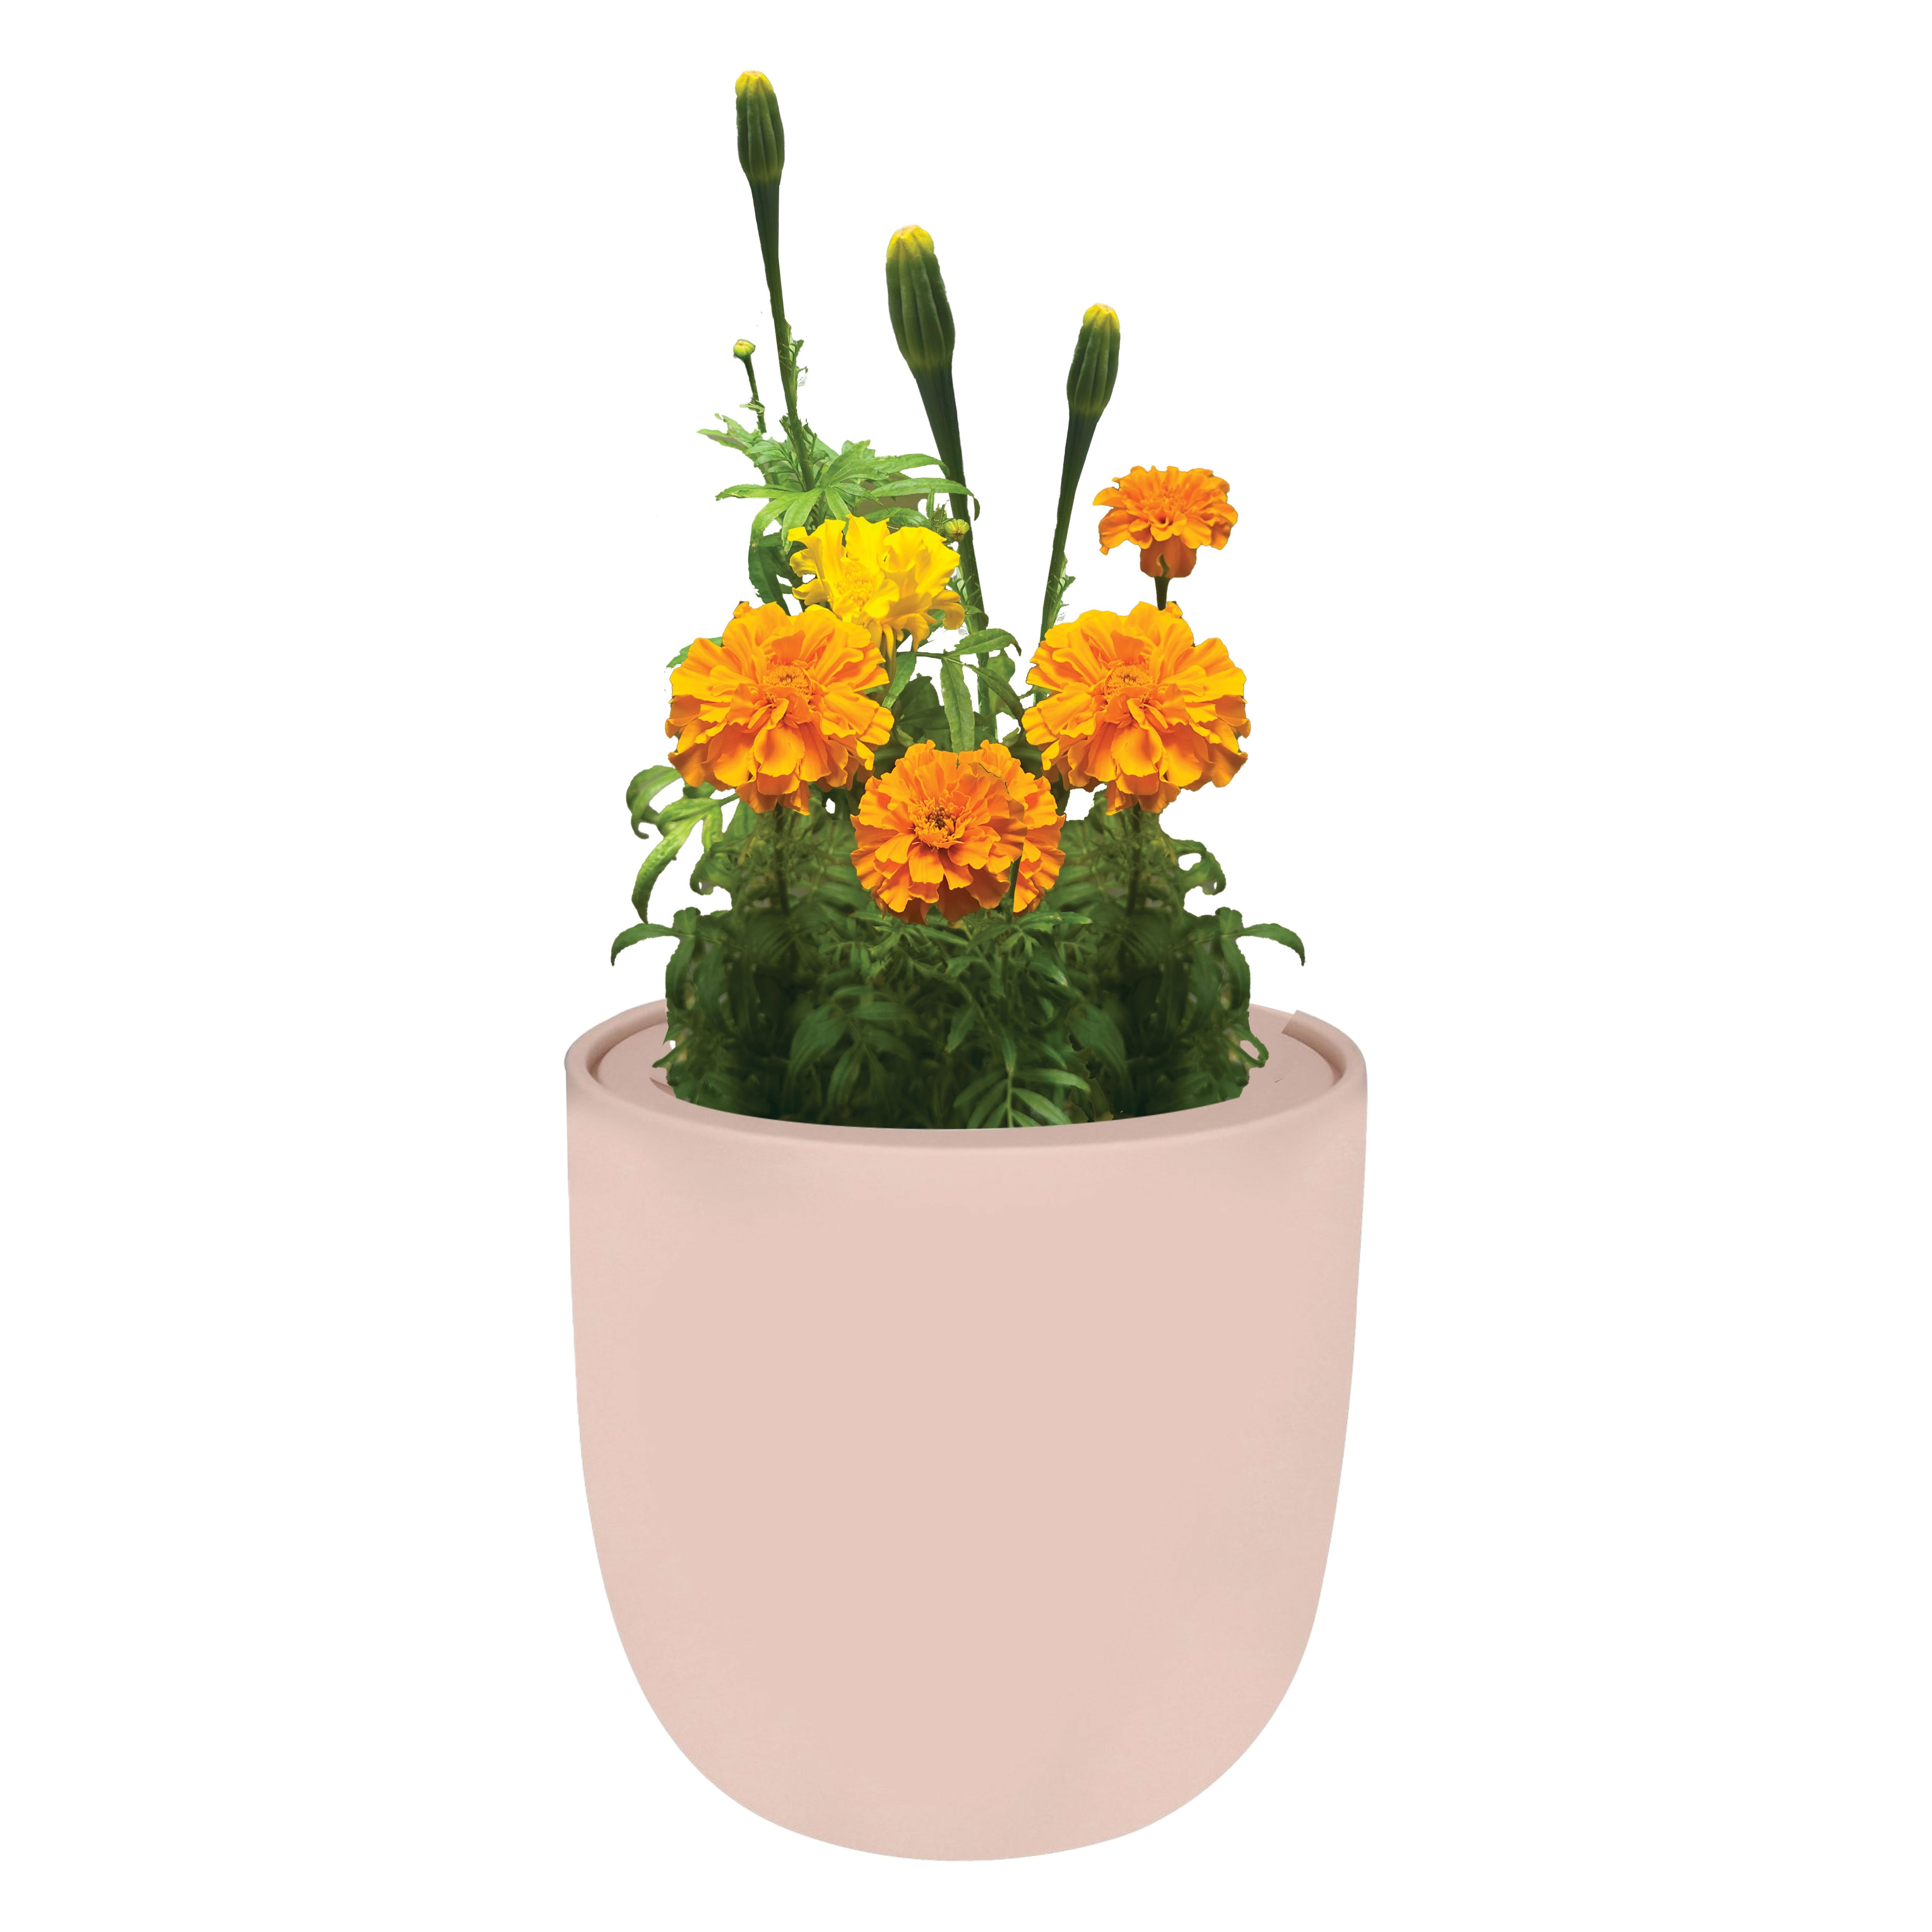 Environet Hydroponic Marigold Growing Kit with Pink Ceramic Pot and Seeds